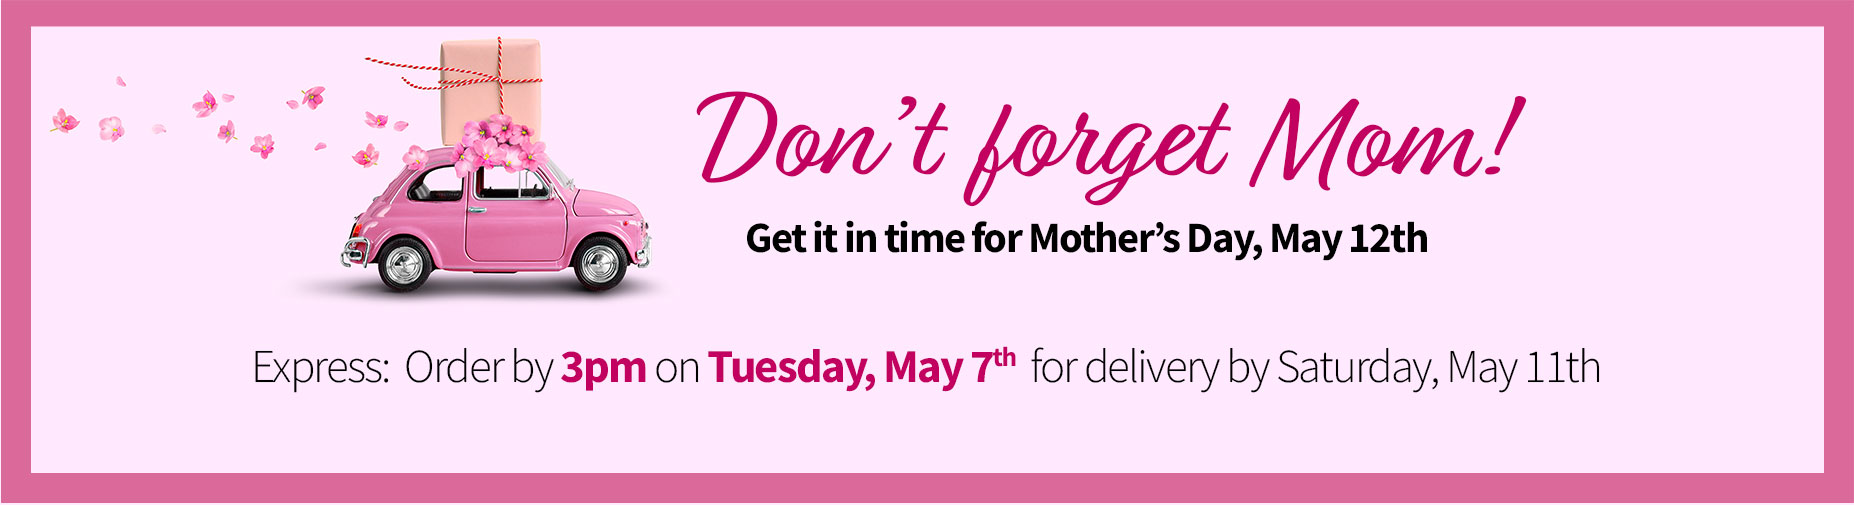 Don't forget about mom. Get it in time for Mother's day, May 12th.